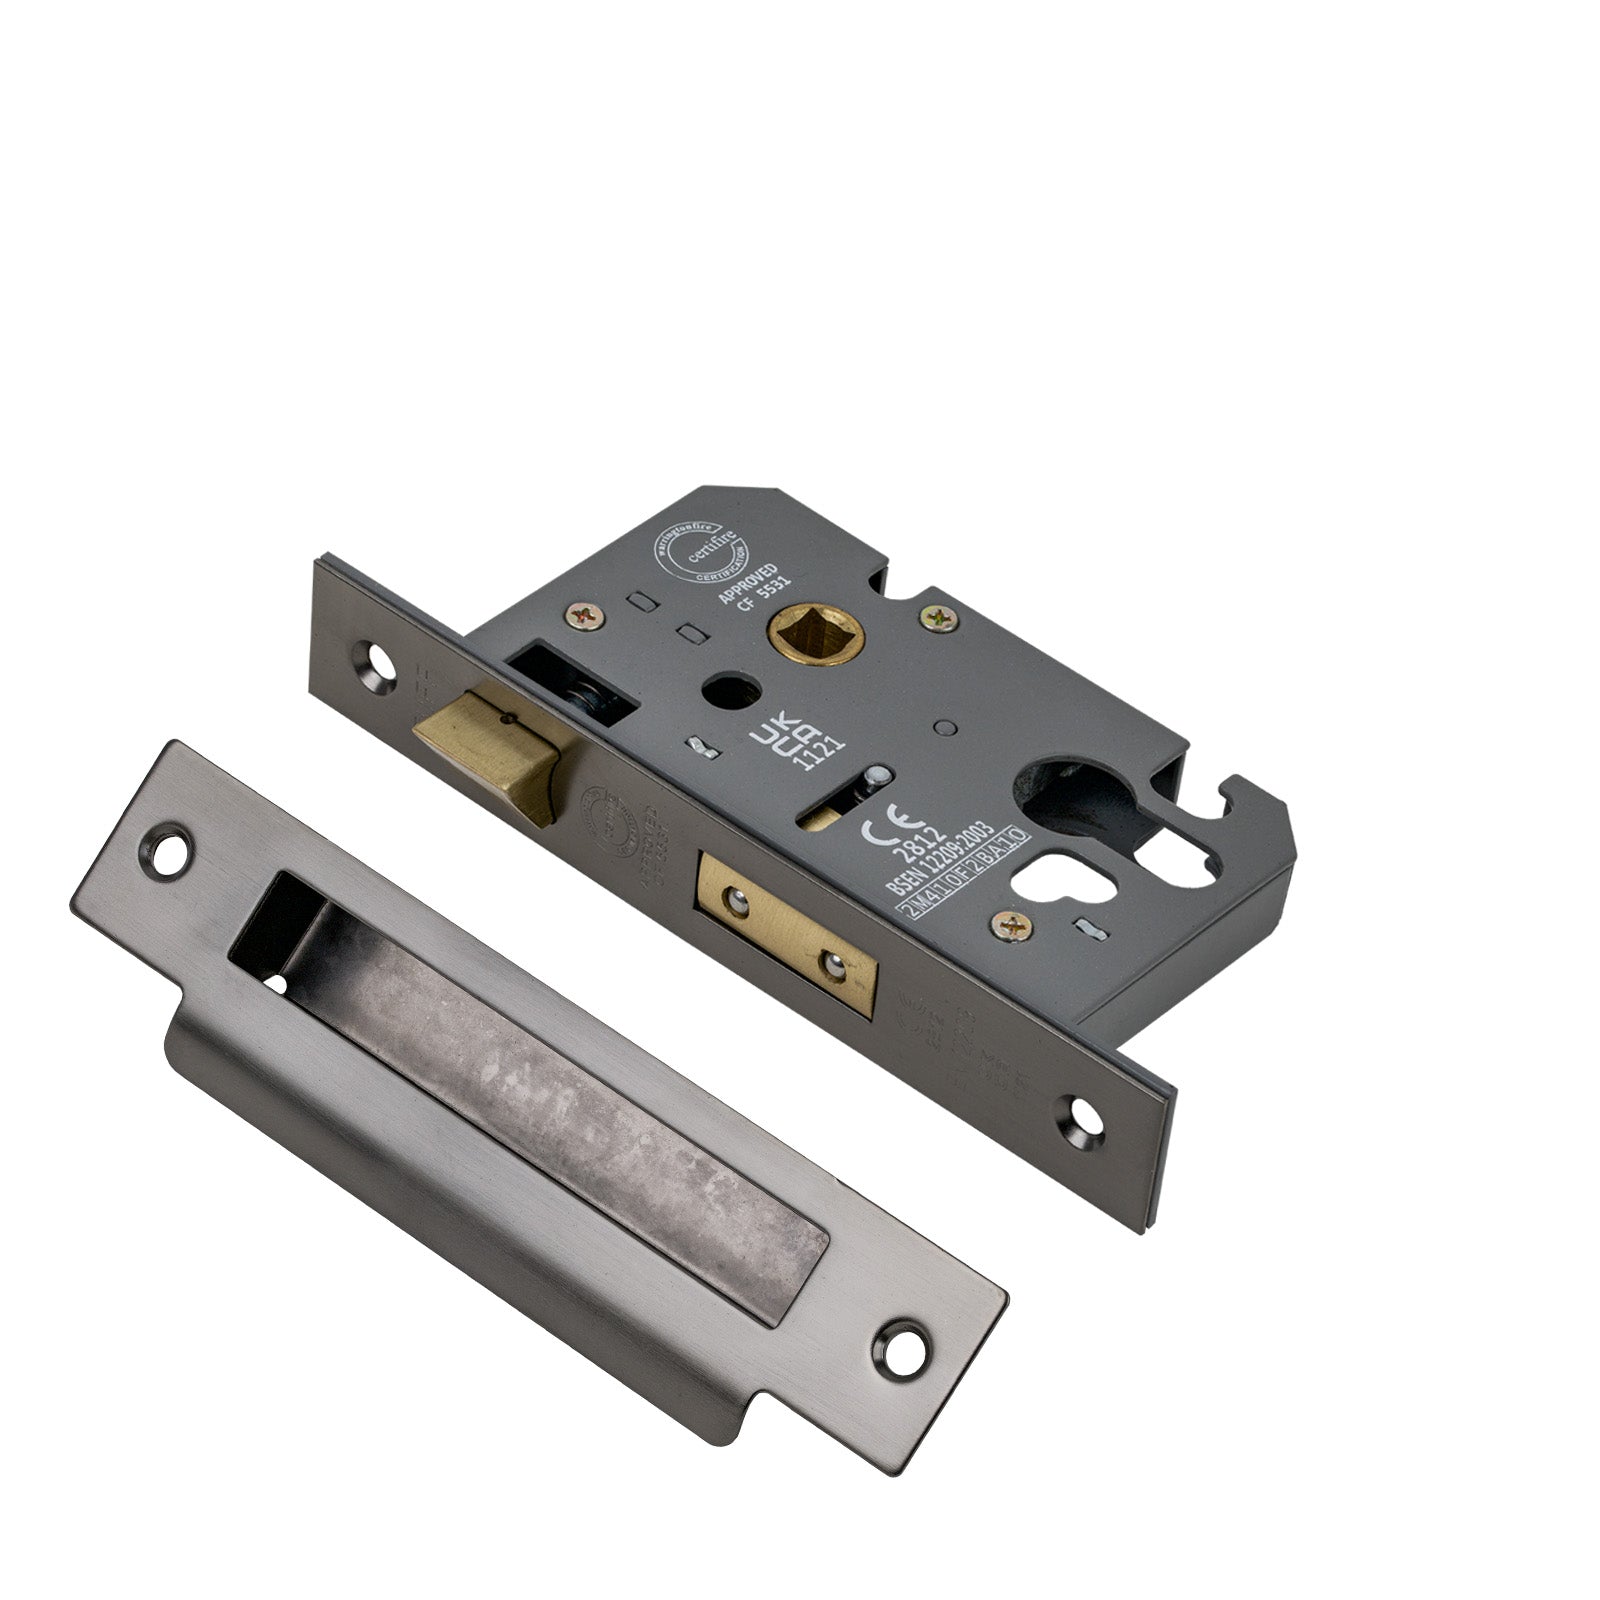 SHOW 3 Lever Euro Sash Lock - 2.5 Inch with Matt Gun Metal finished forend and striker plate